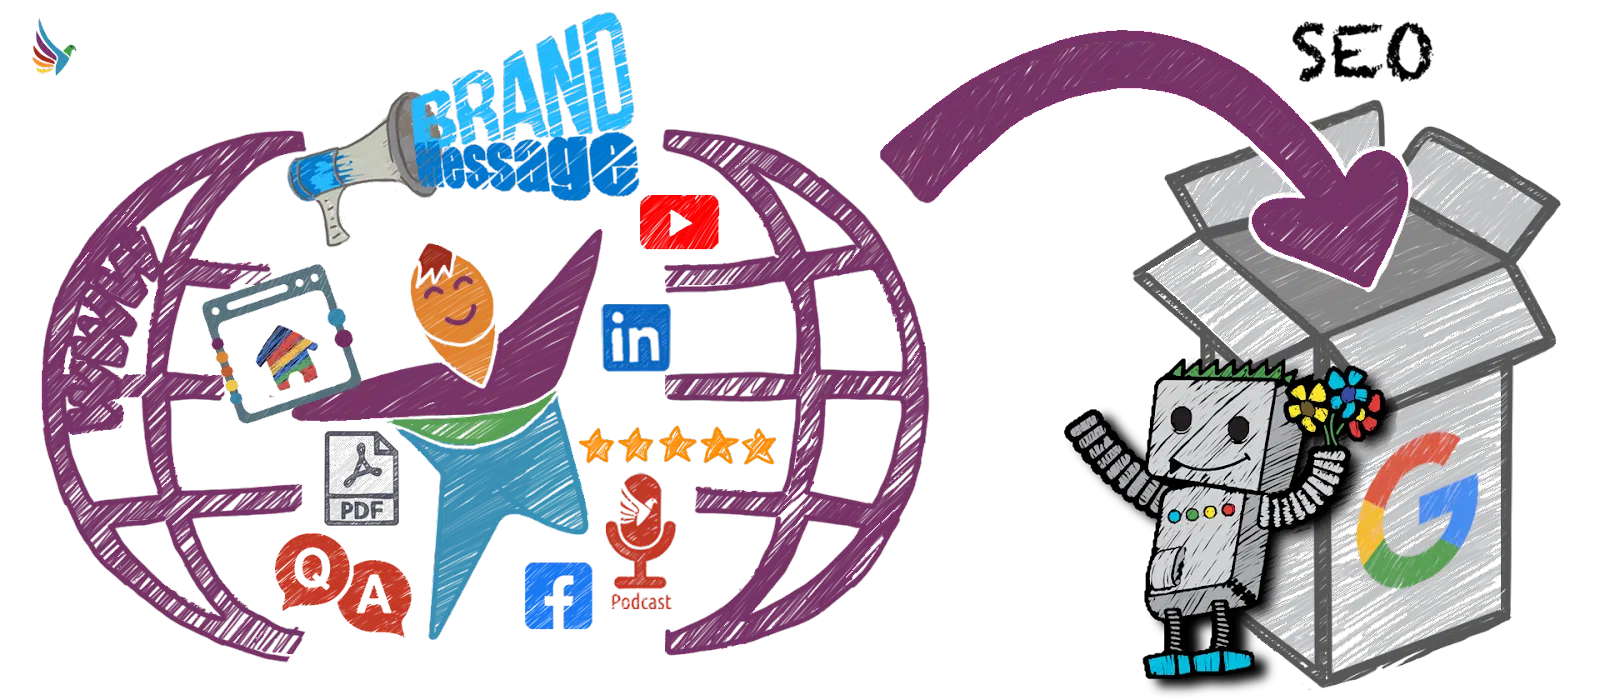 Package your brand and marketing with SEO, showcasing your business as the top solution